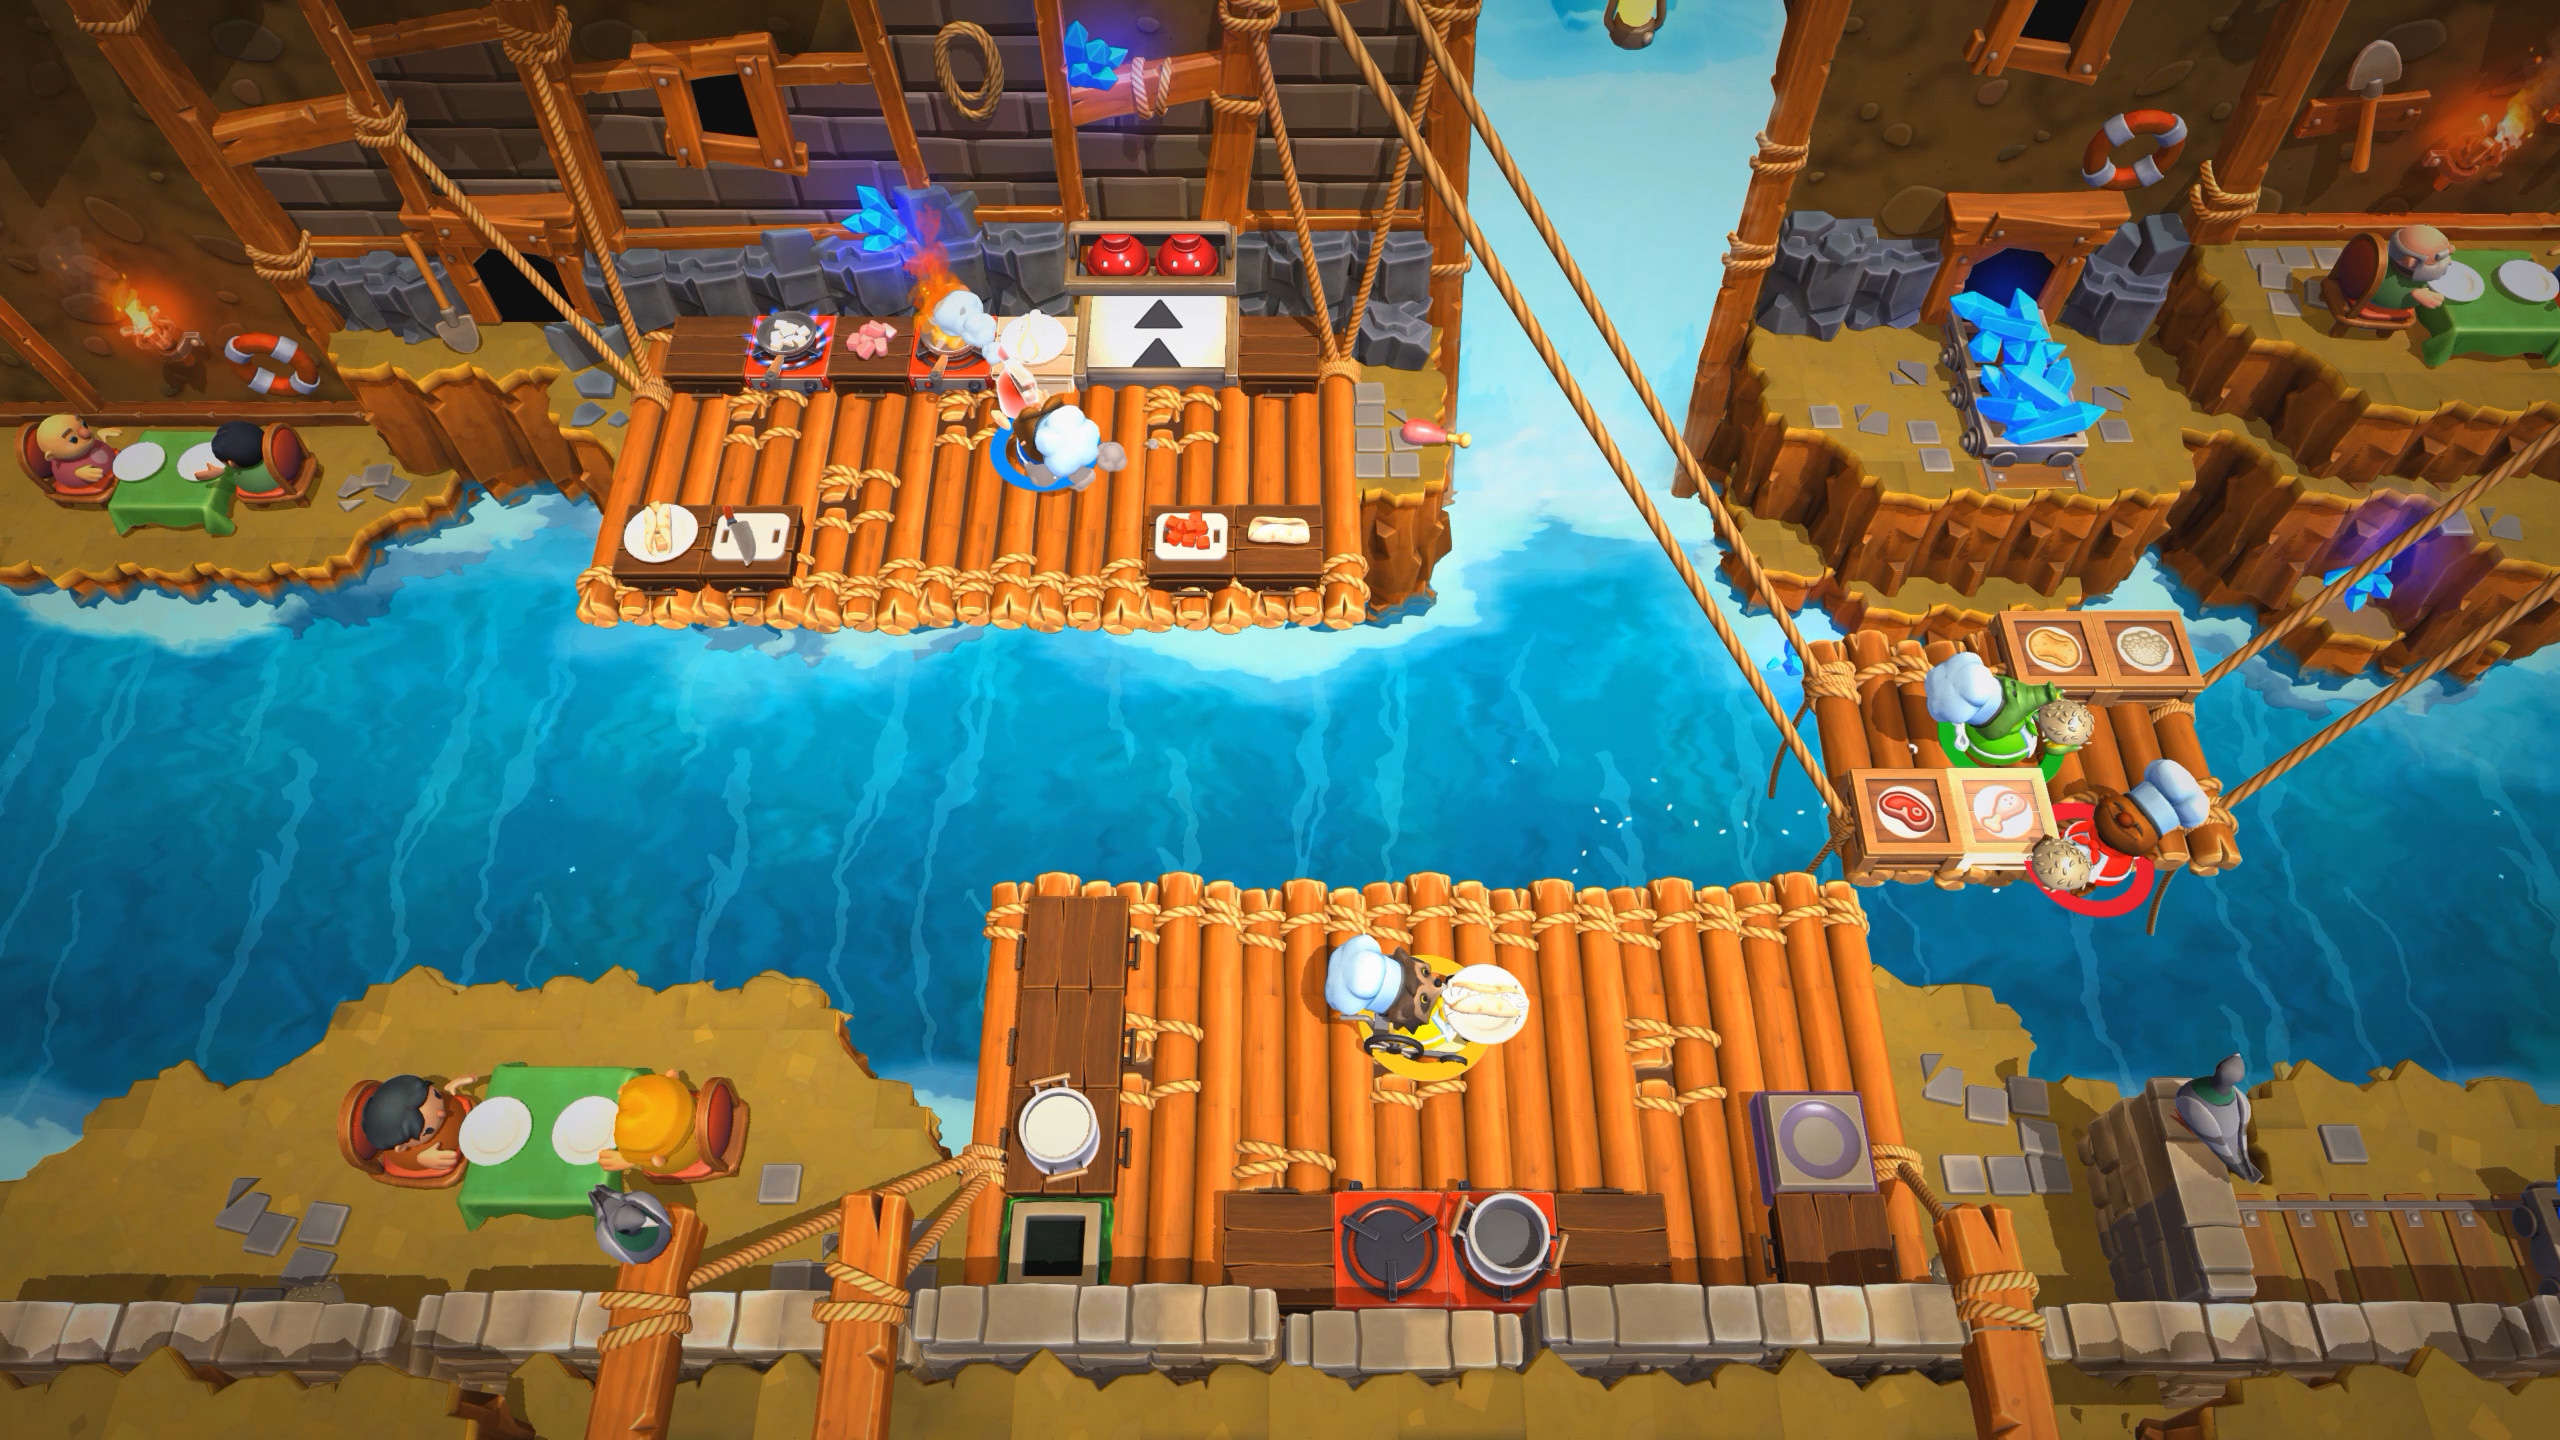 overcooked for wii